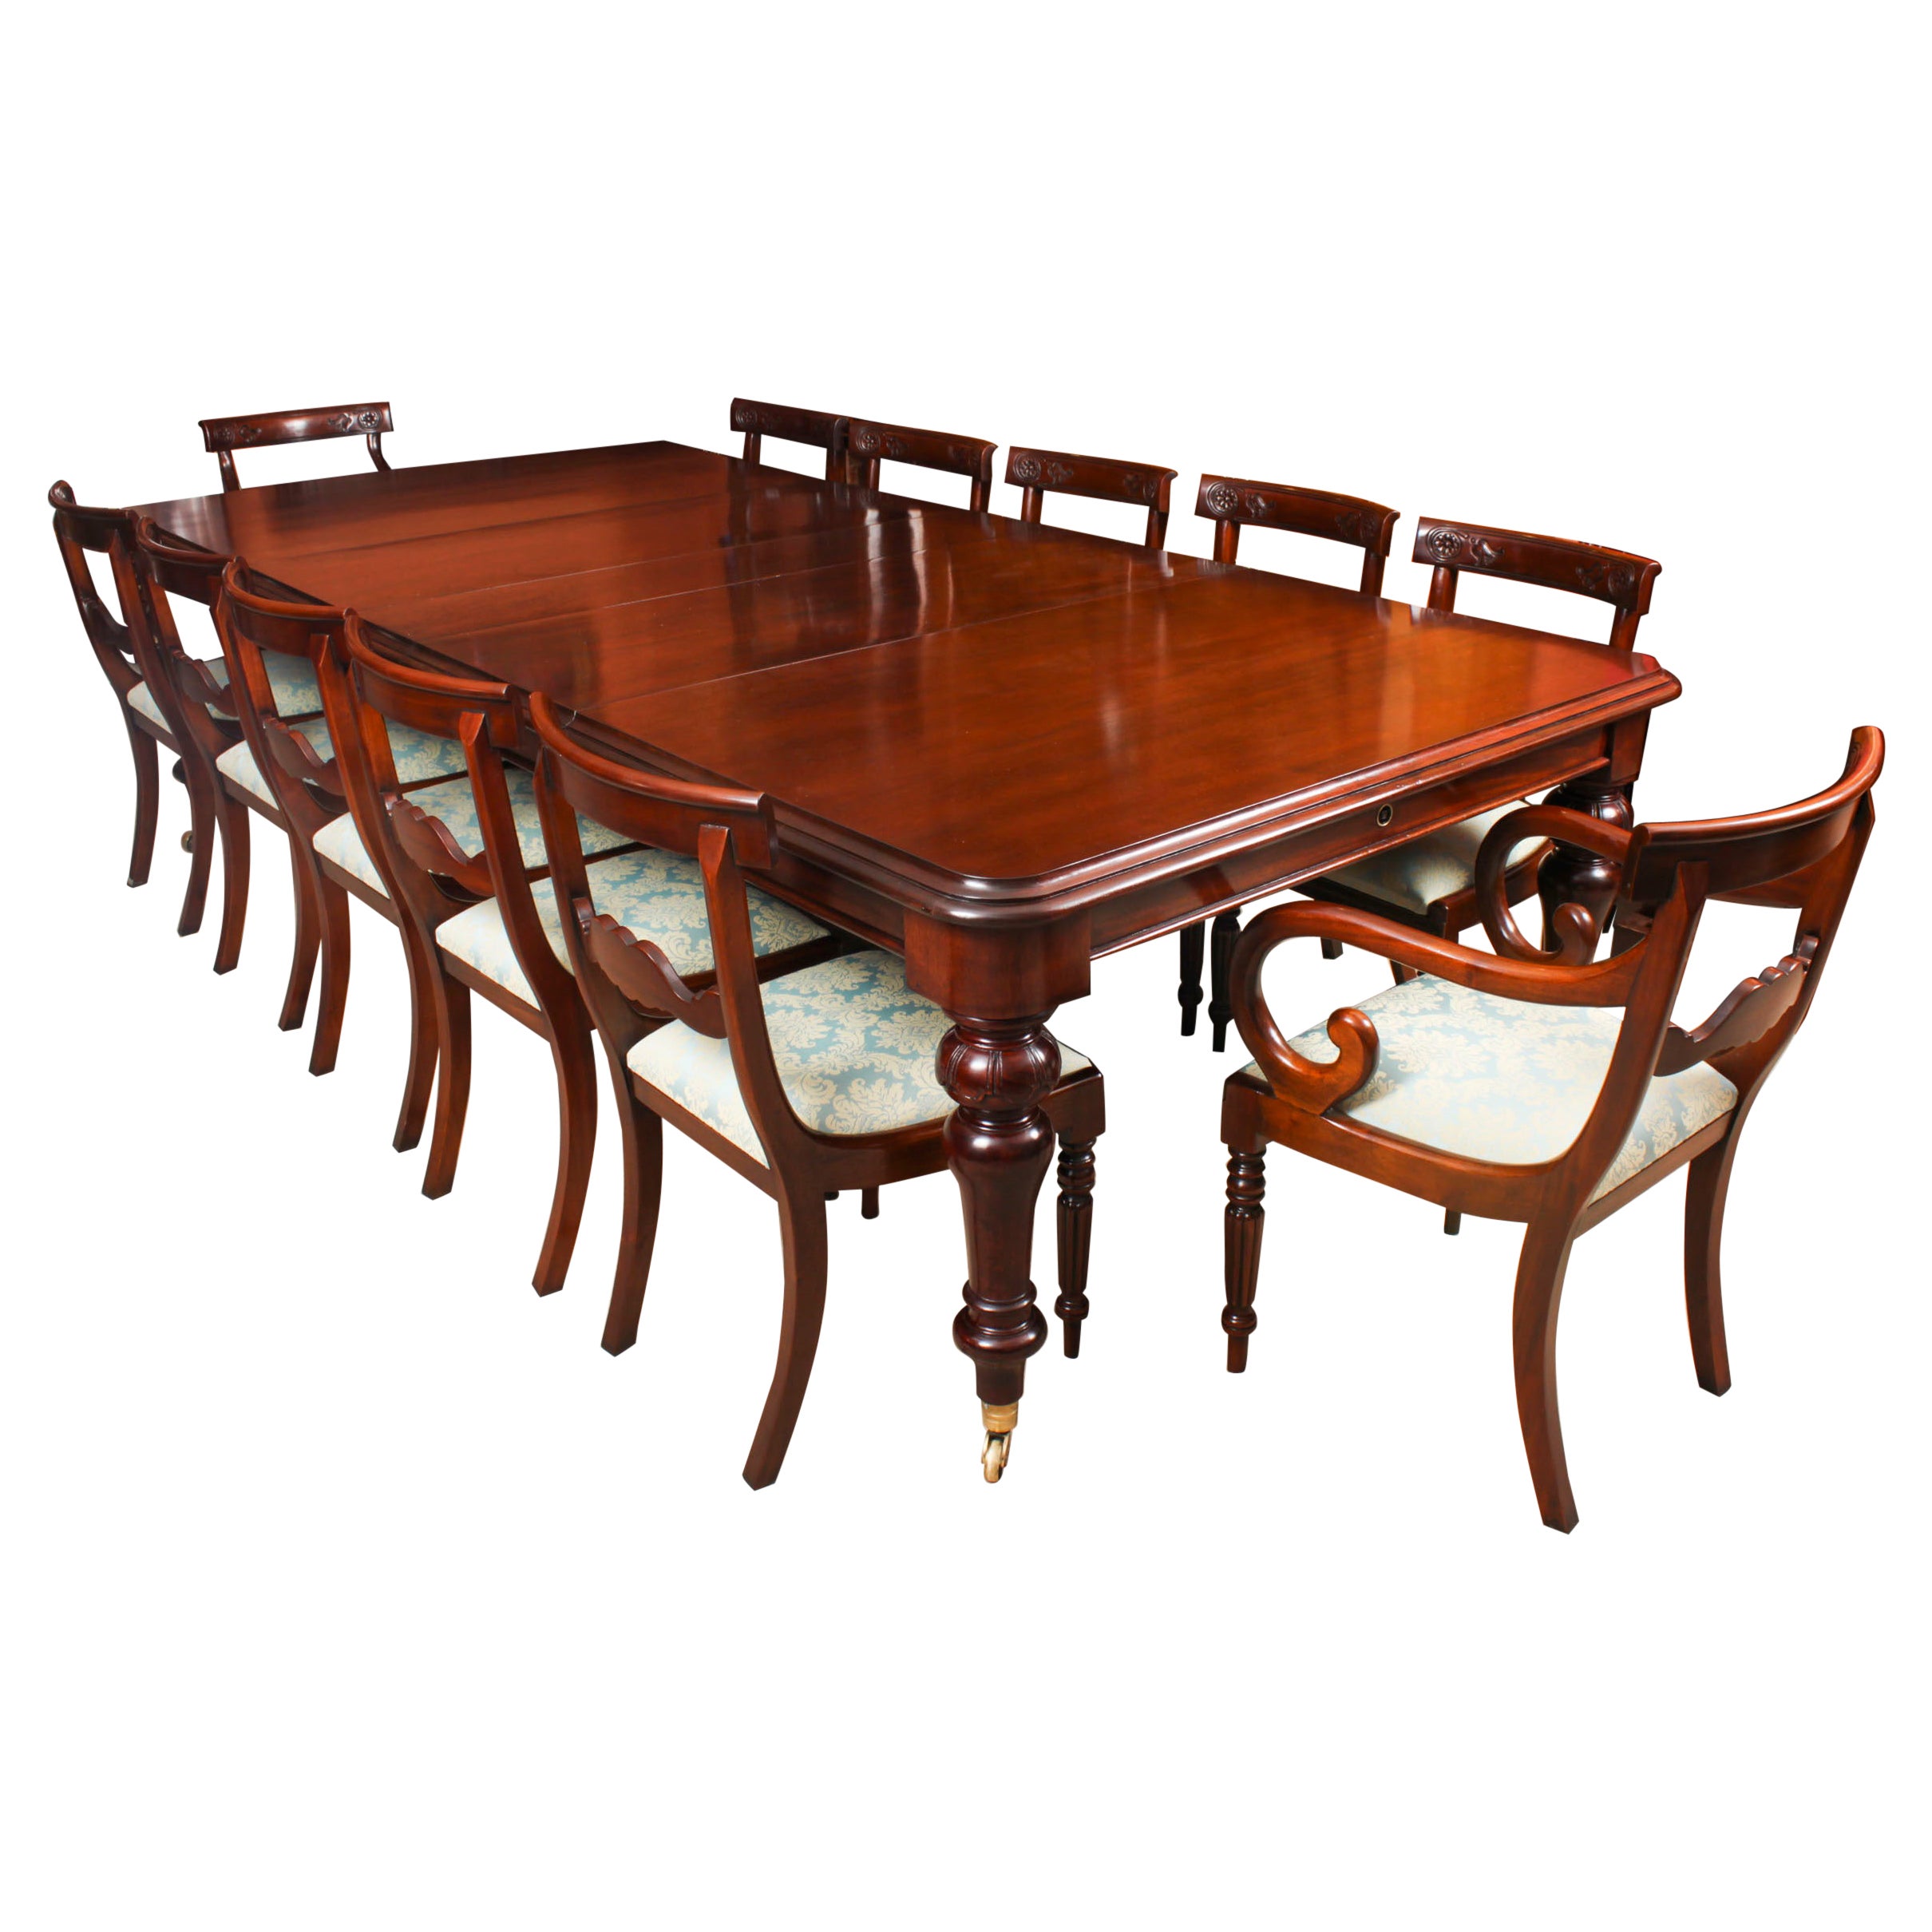 Antique William IV Mahogany Dining Table C1835 &10 Bar back dining chairs For Sale